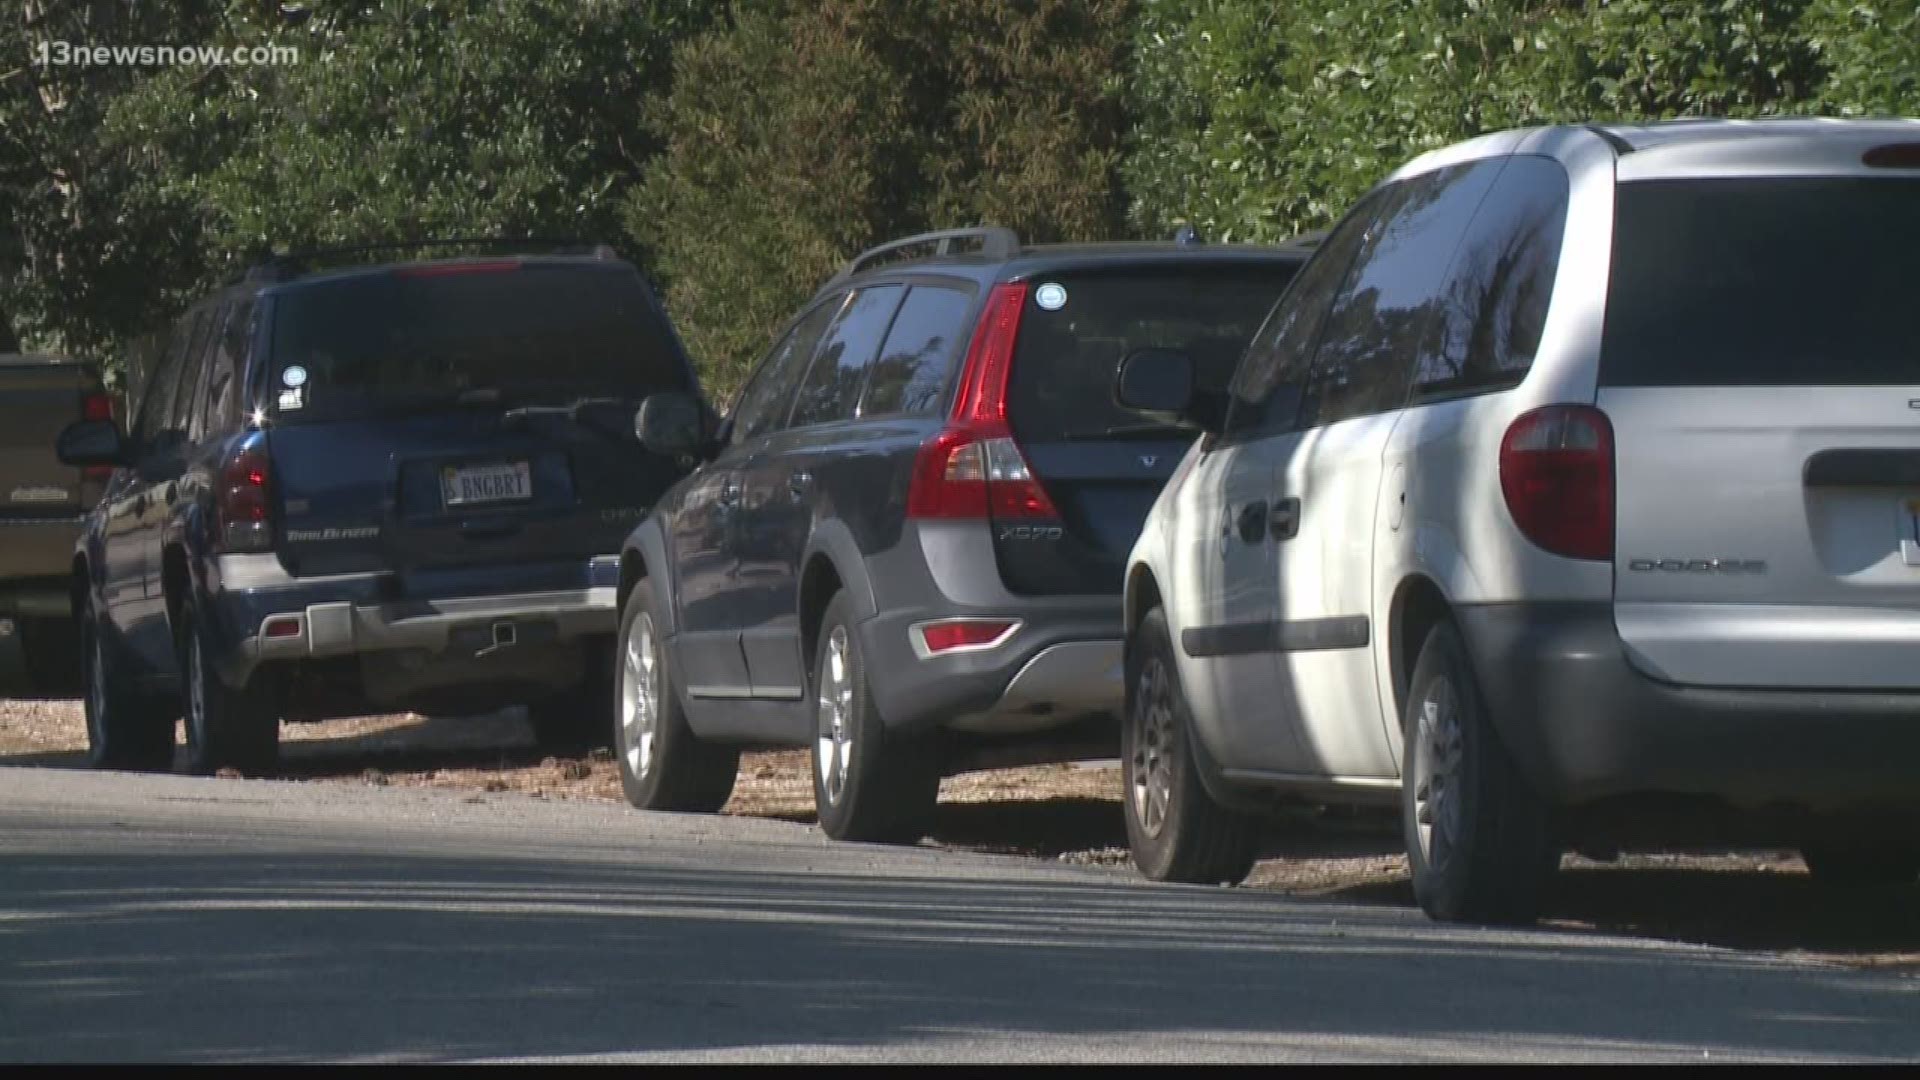 Neighbors in the Cavalier Shores neighborhood of Virginia Beach are going to city council to come up with a solution for parking problems as construction workers take residents' spots.